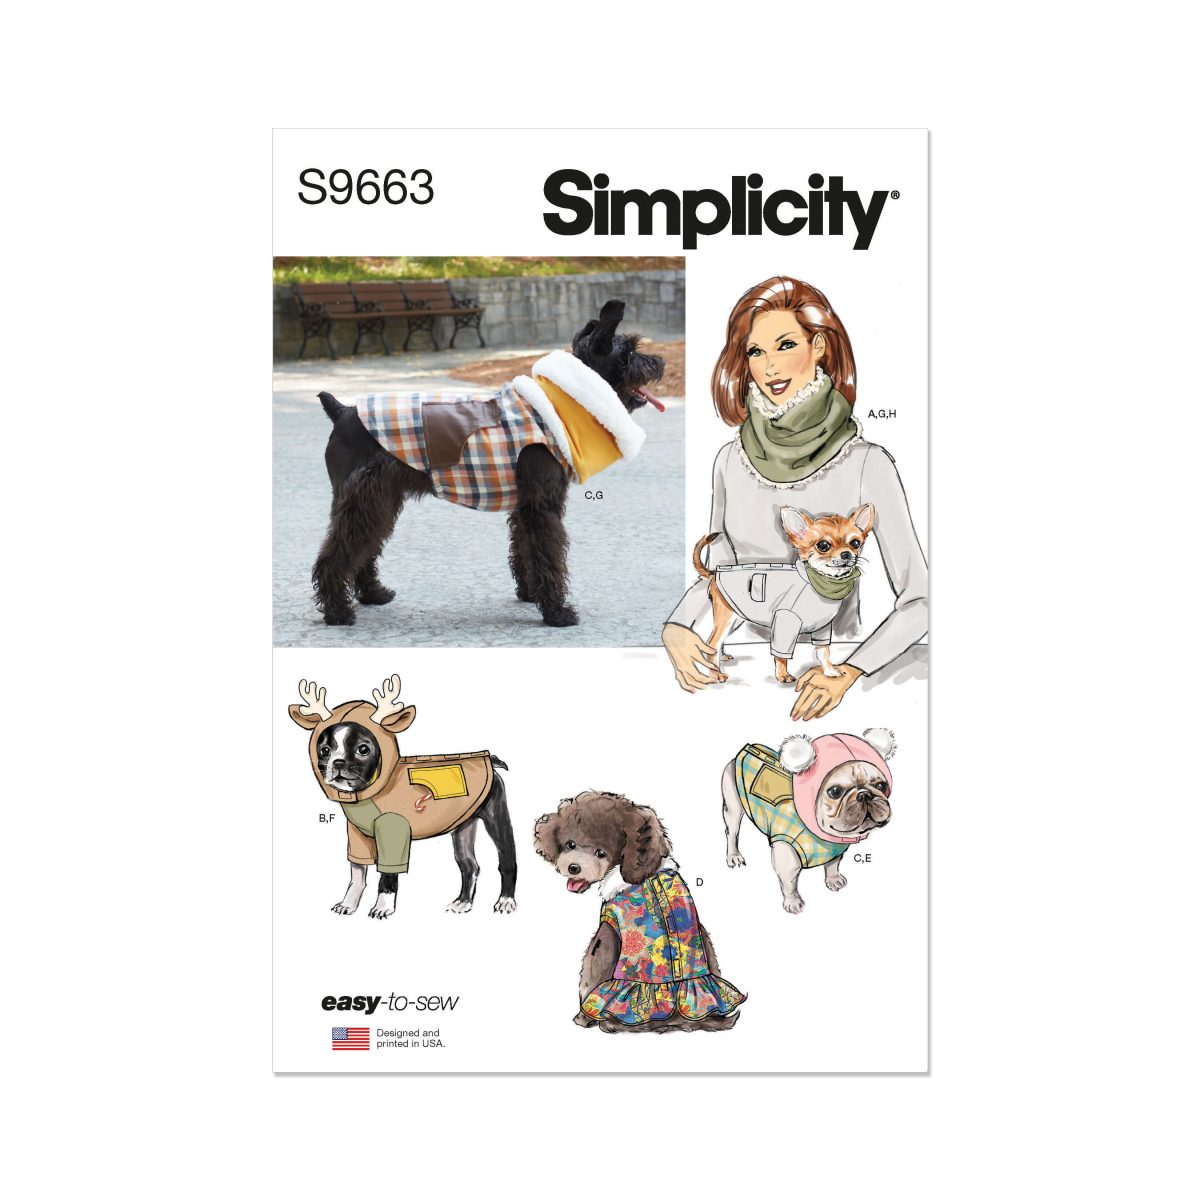 Simplicity Sewing Pattern S9663 Pet Coats with Optional Hoods and Cowls in Sizes S-M-L and Adult Cowl